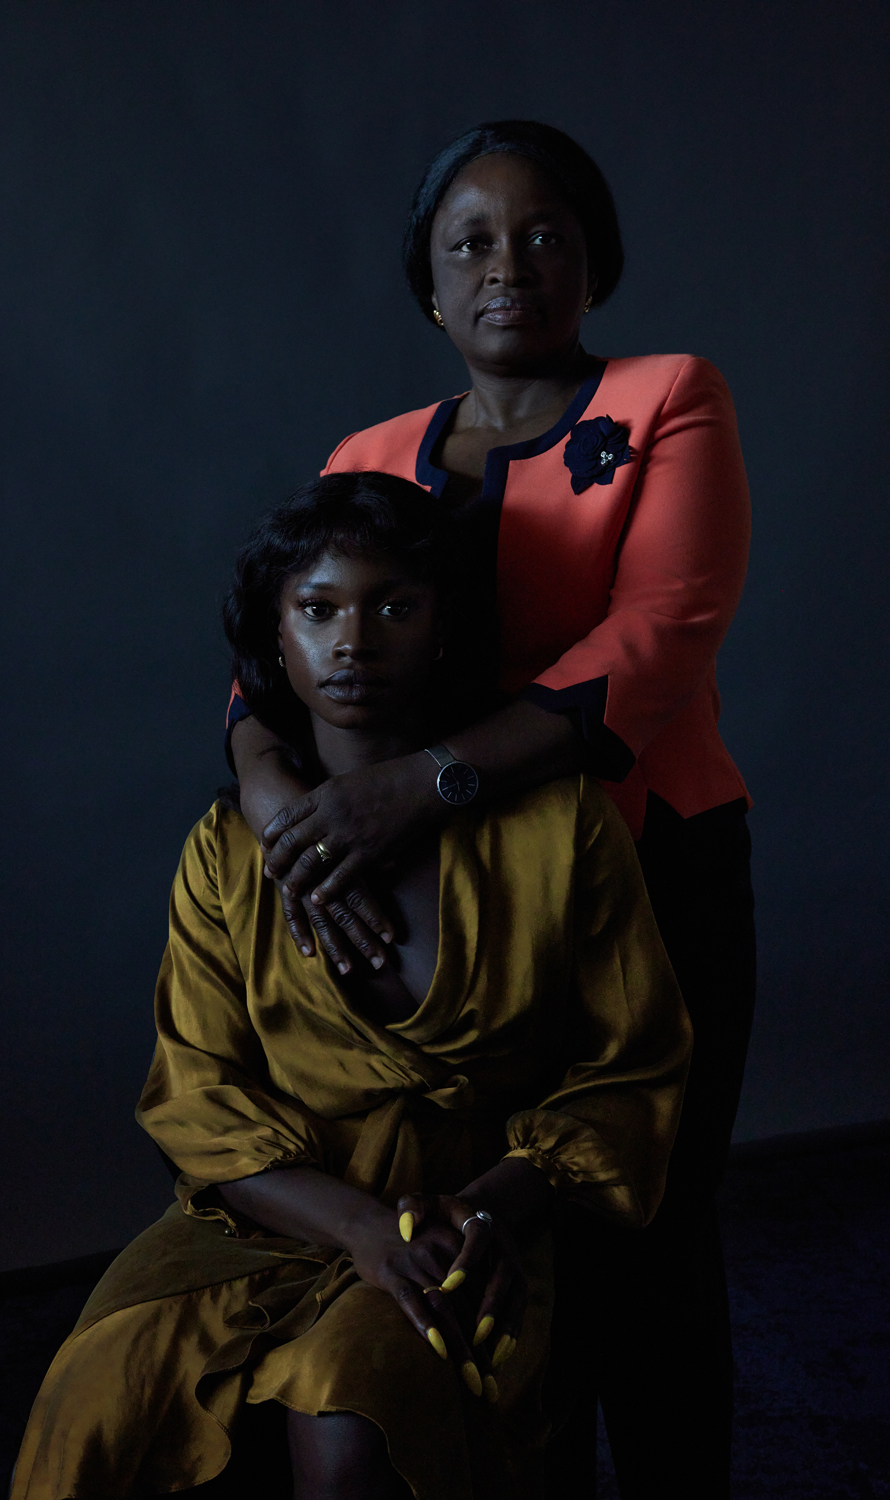 Western’s Olayide Ogunsiji (standing) and spokesperson Fatu Sillah (seated) are a formidable united front working to collate data and raise awareness about the impact of female genital mutilation/ cutting on an estimated 53,000 women and girls in Australia today.